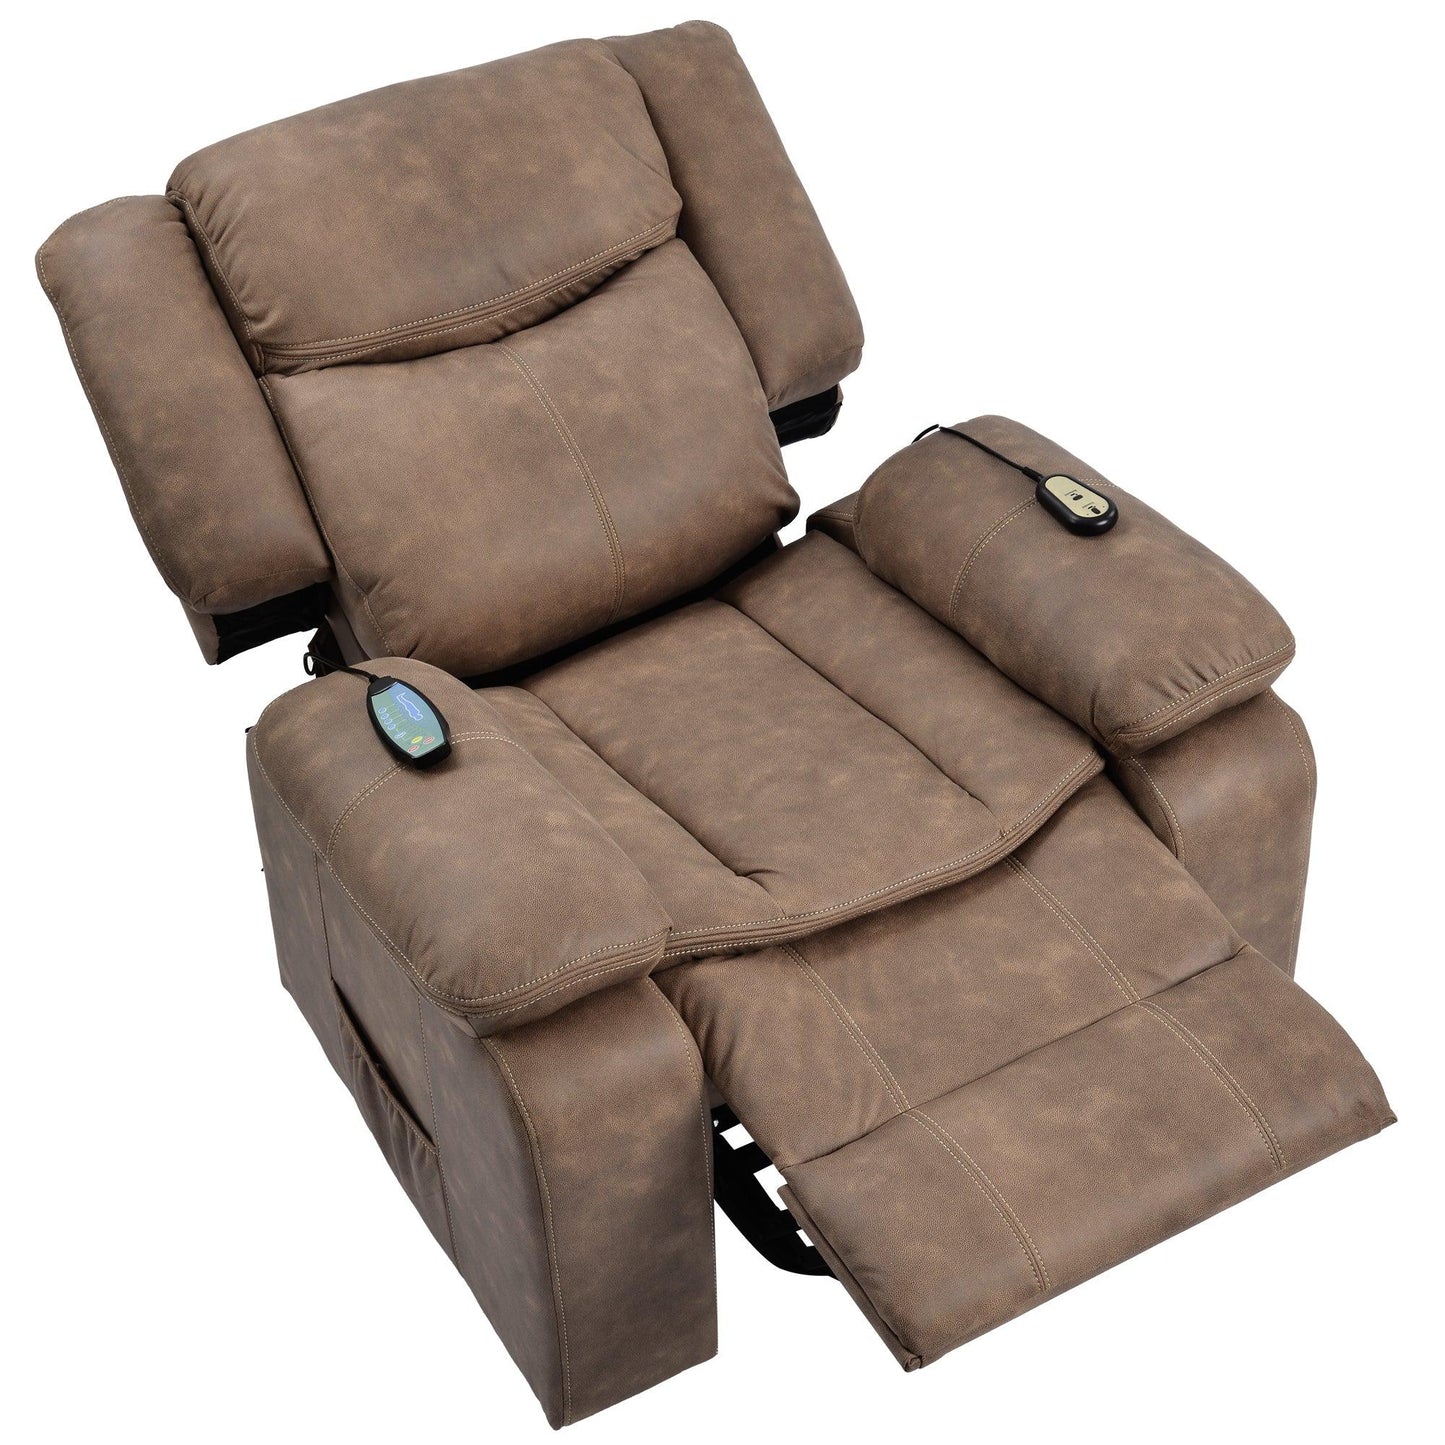 Power Lift Chair with Adjustable Massage and Heating Function, Brown FredCo